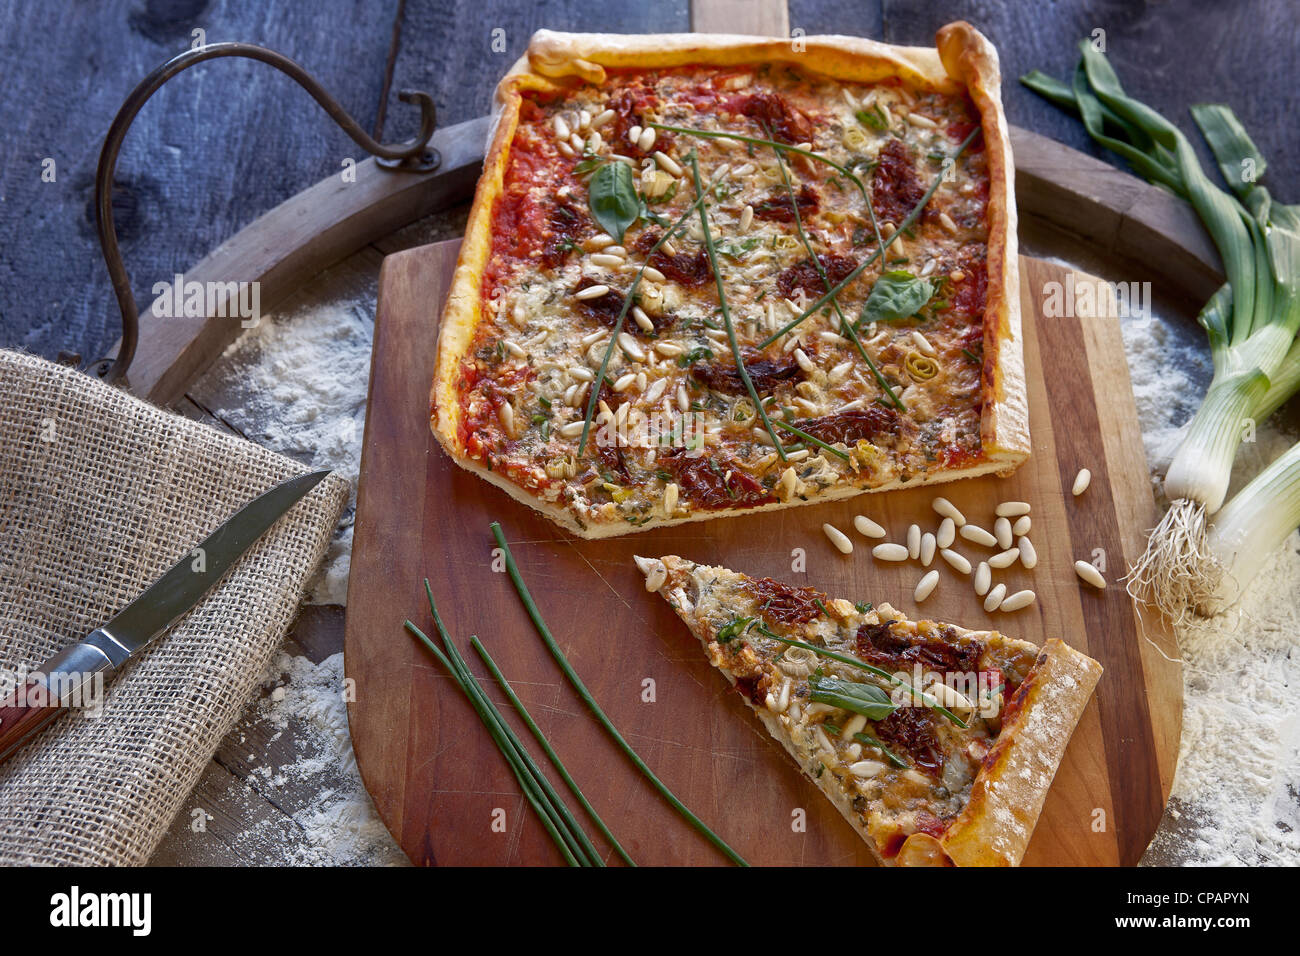 Pizza topped with cottage cheese and herbs Stock Photo